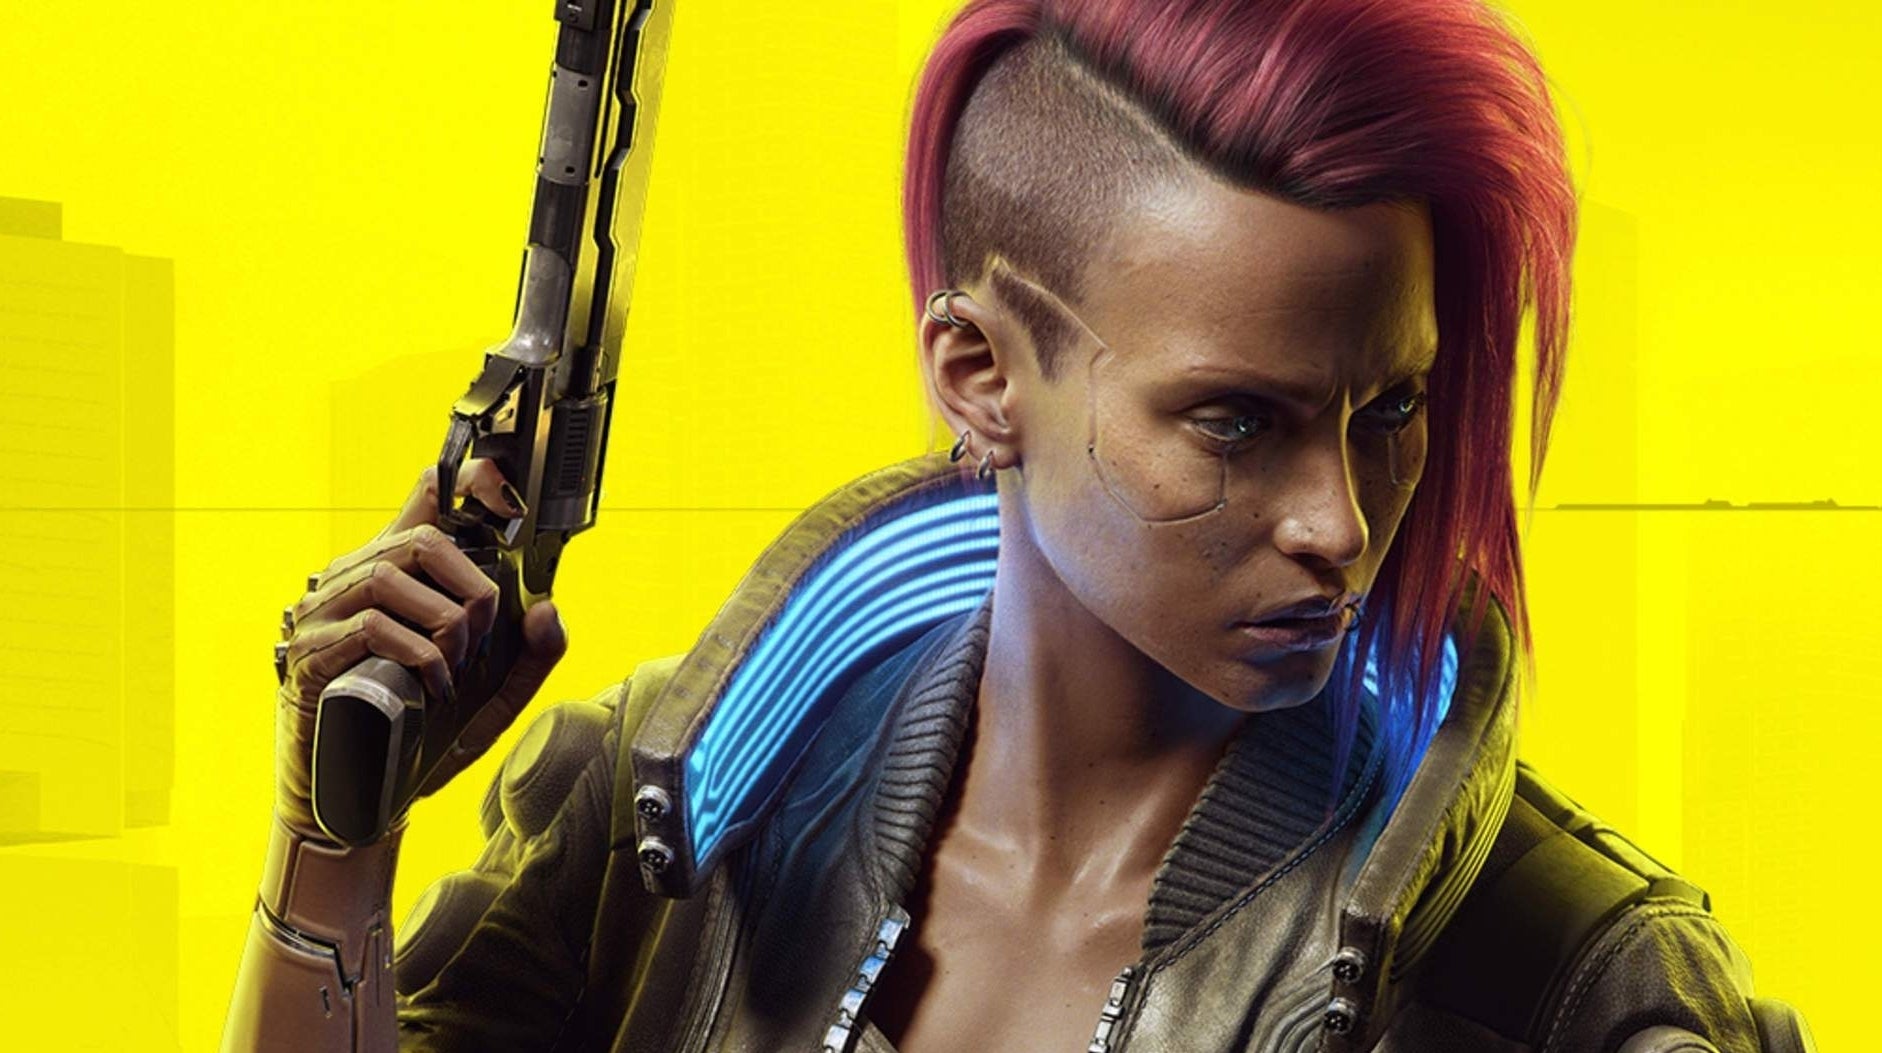 Cyberpunk 2077's revival continues as it becomes one of the most popular games on Steam Deck - Eurogamer.net